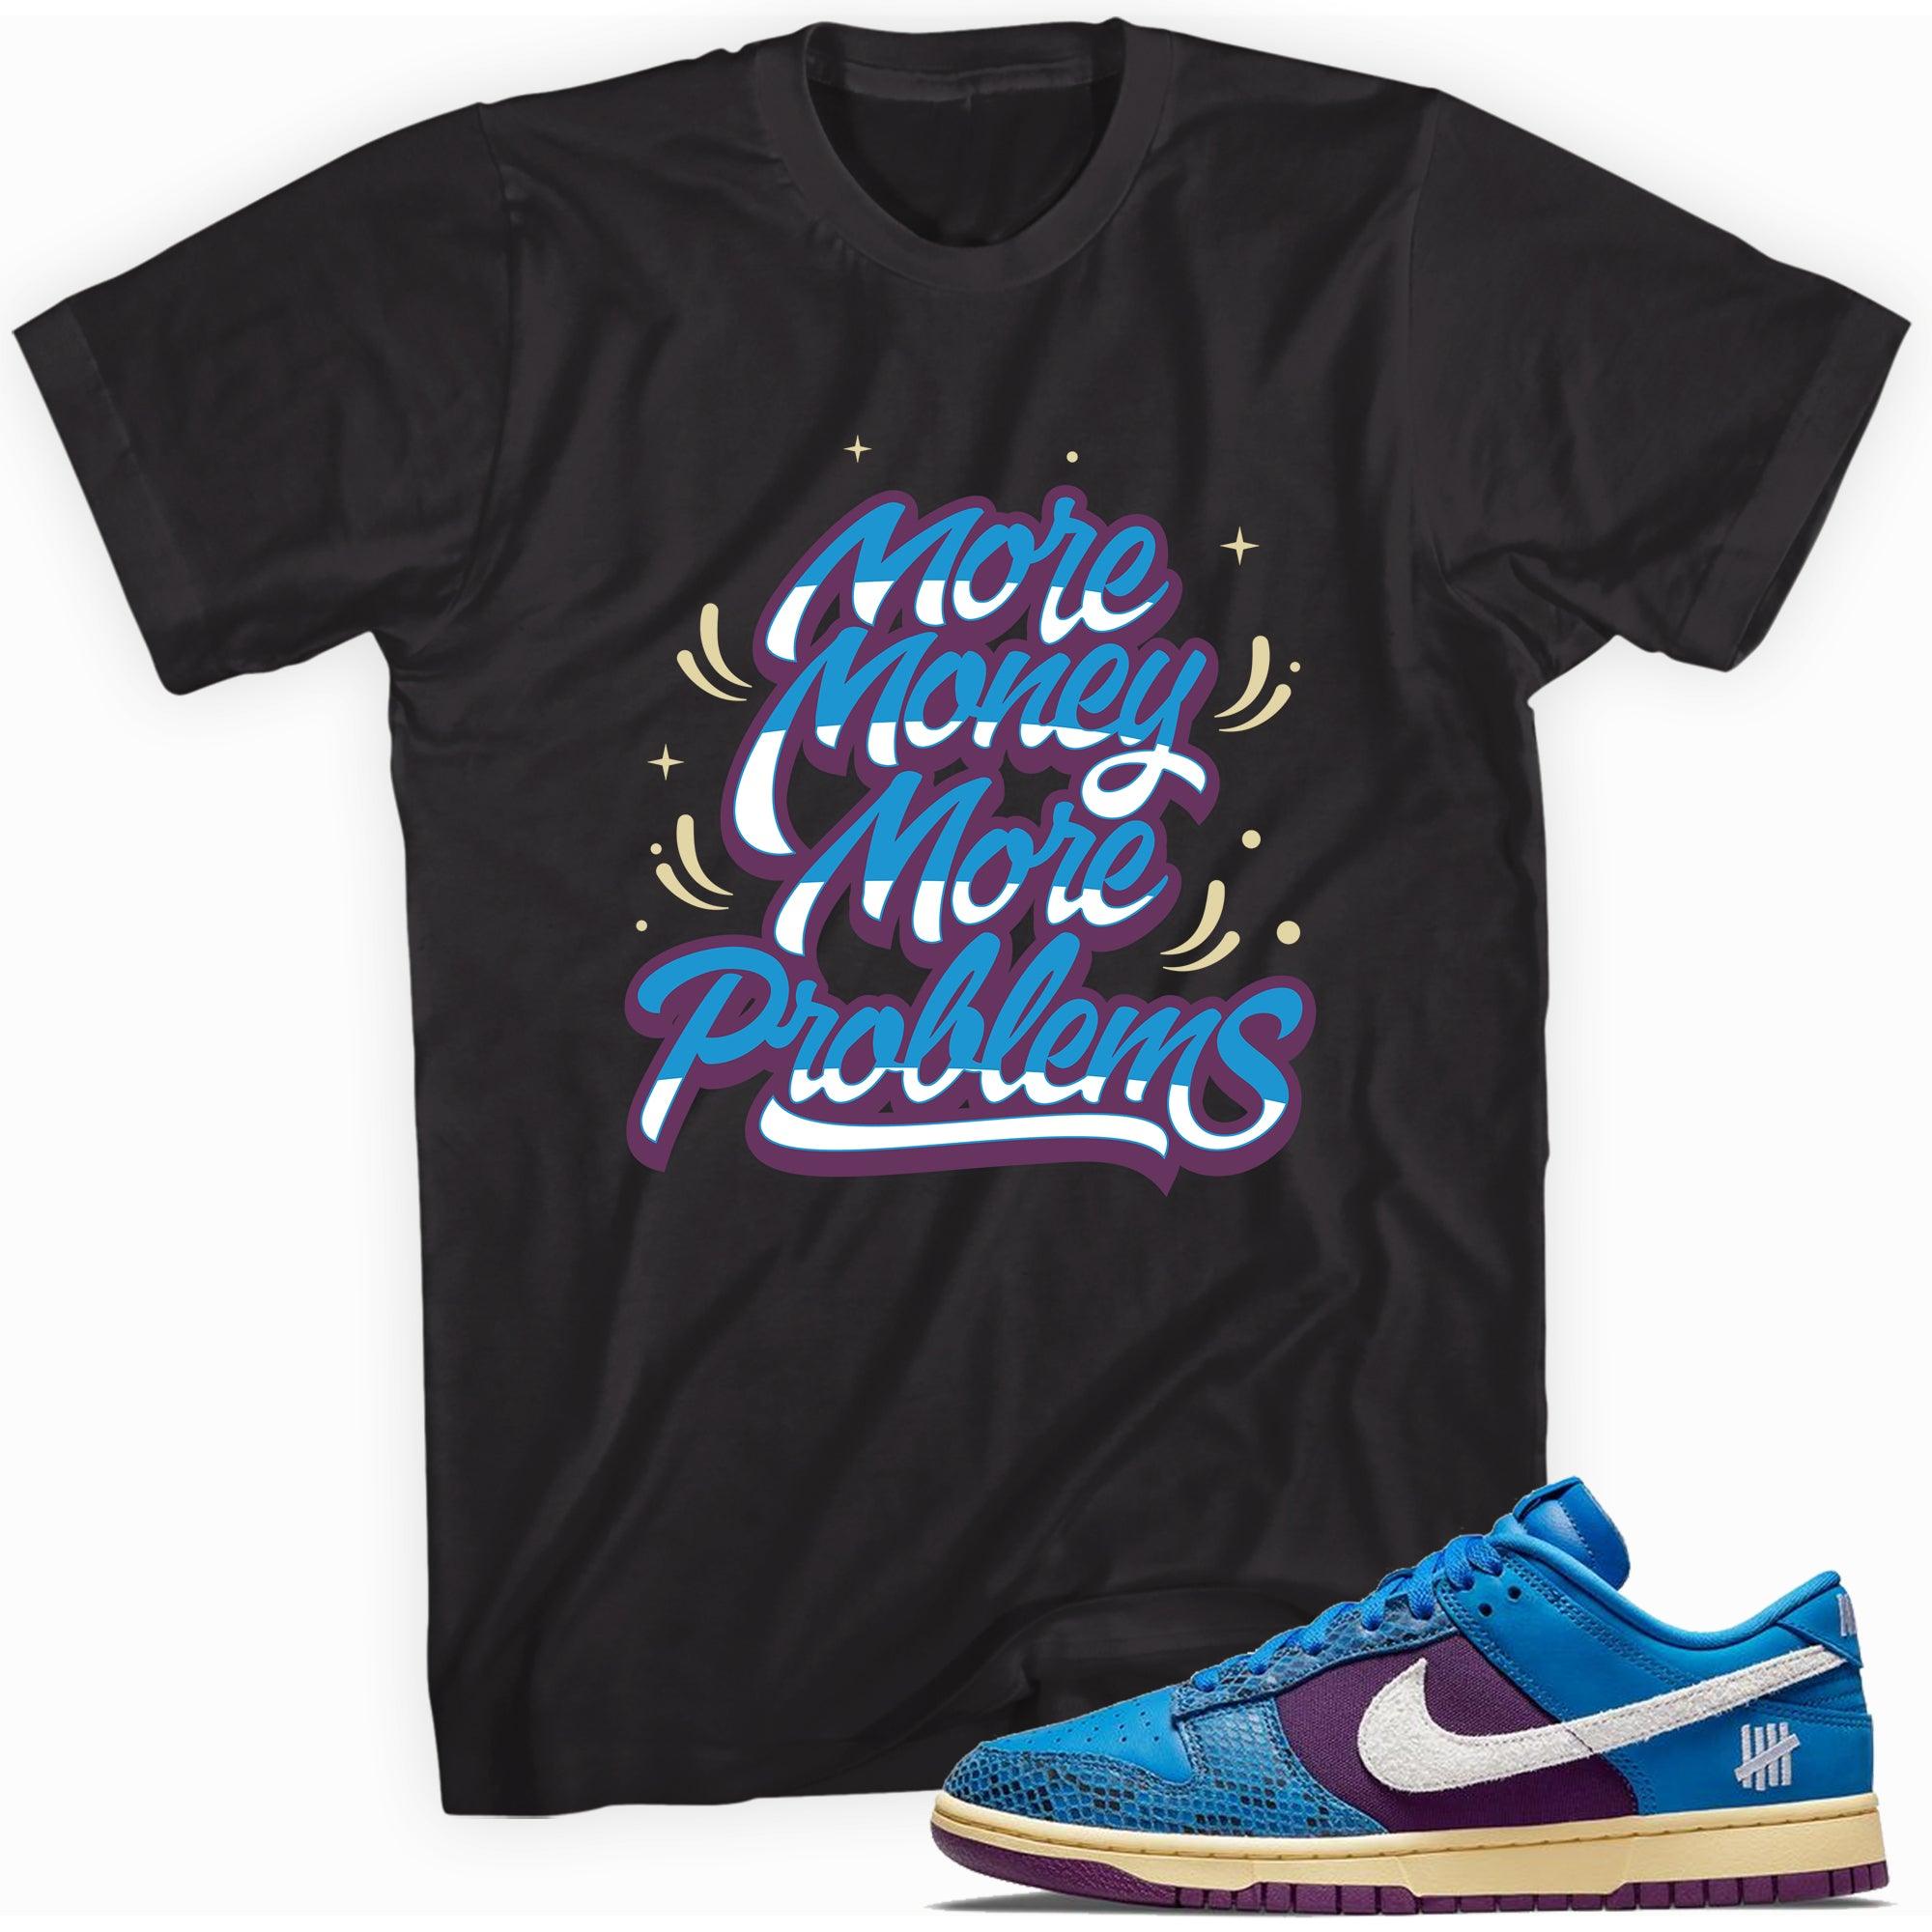 More Money More Problems Shirt Dunk Low Undefeated 5 On It Dunk vs AF1 Sneakers photo